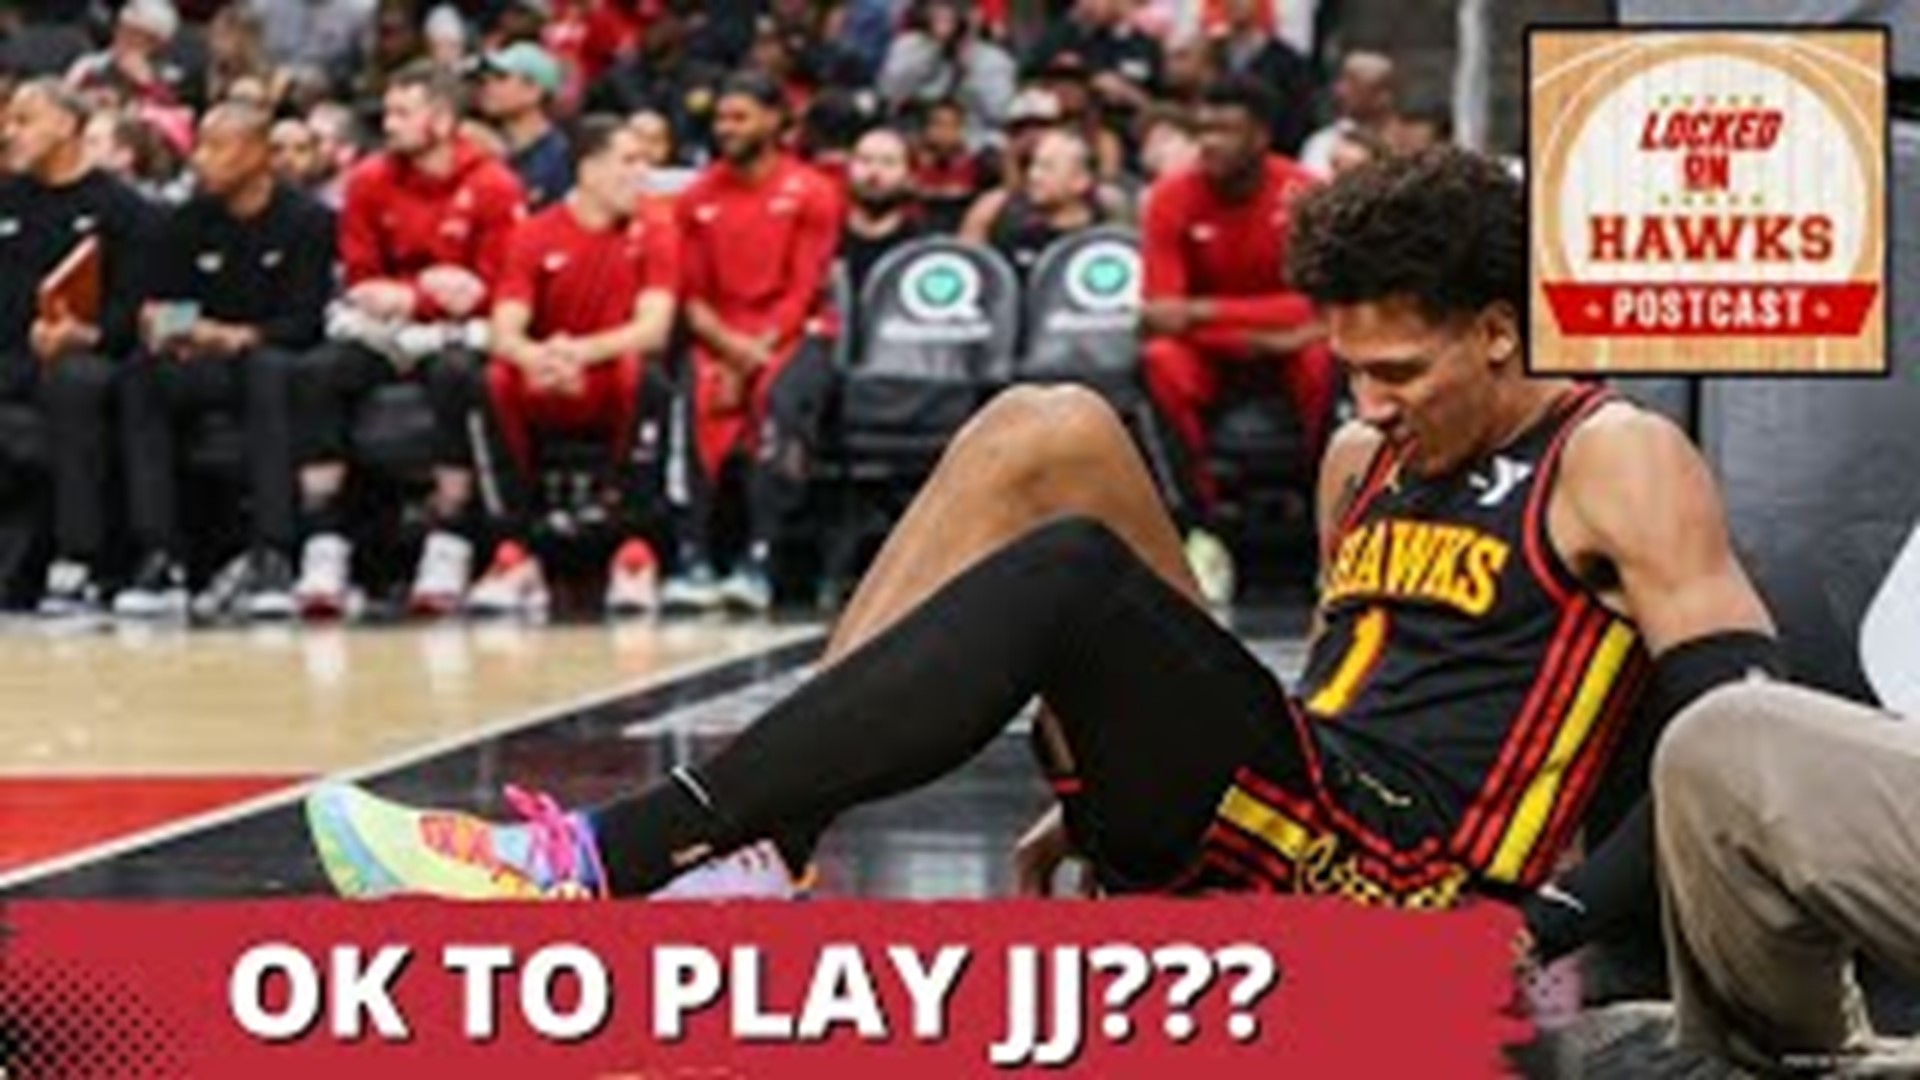 Double overtime.

Triple-double.

Double trouble.

The Atlanta Hawks' playoff hot seat continues to 'heat' up after Tuesday evening's disappointing double-overtime L